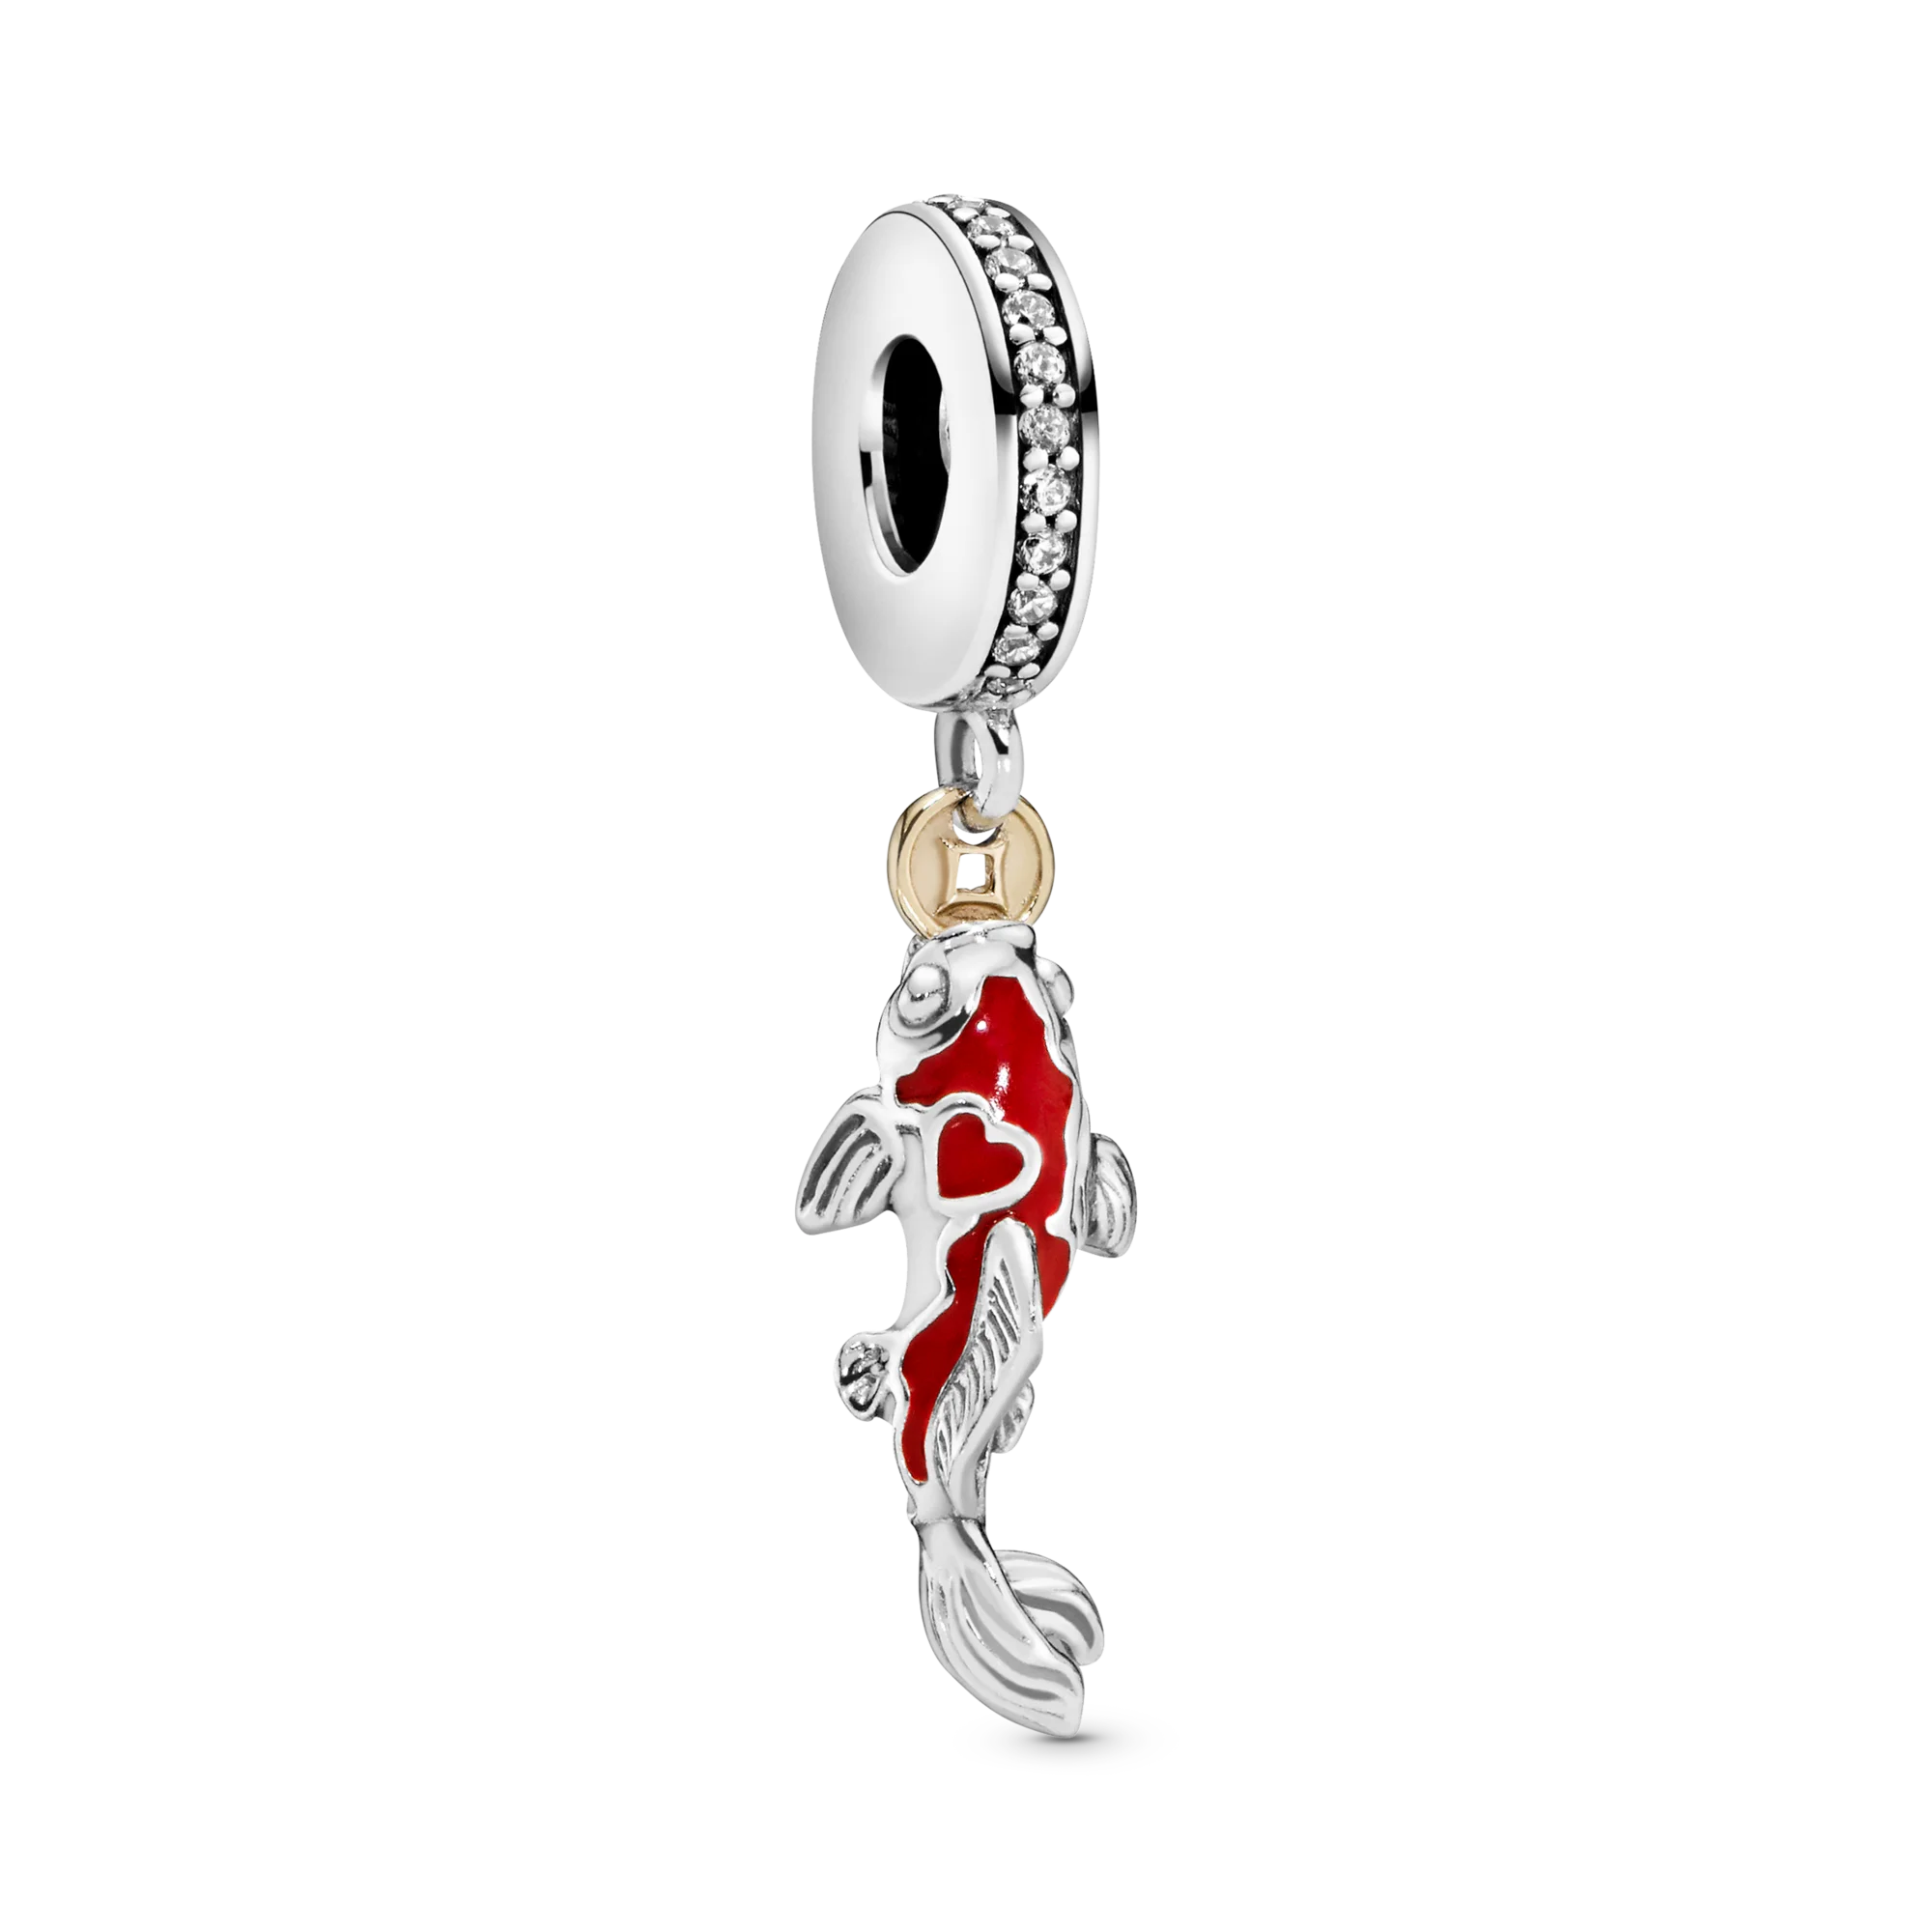 

2021 New 100% 925 Sterling SILVER charms Good Fortune Carp Fish Dangle Charm fit Original Pandora Bracelet silver 925 jewelry